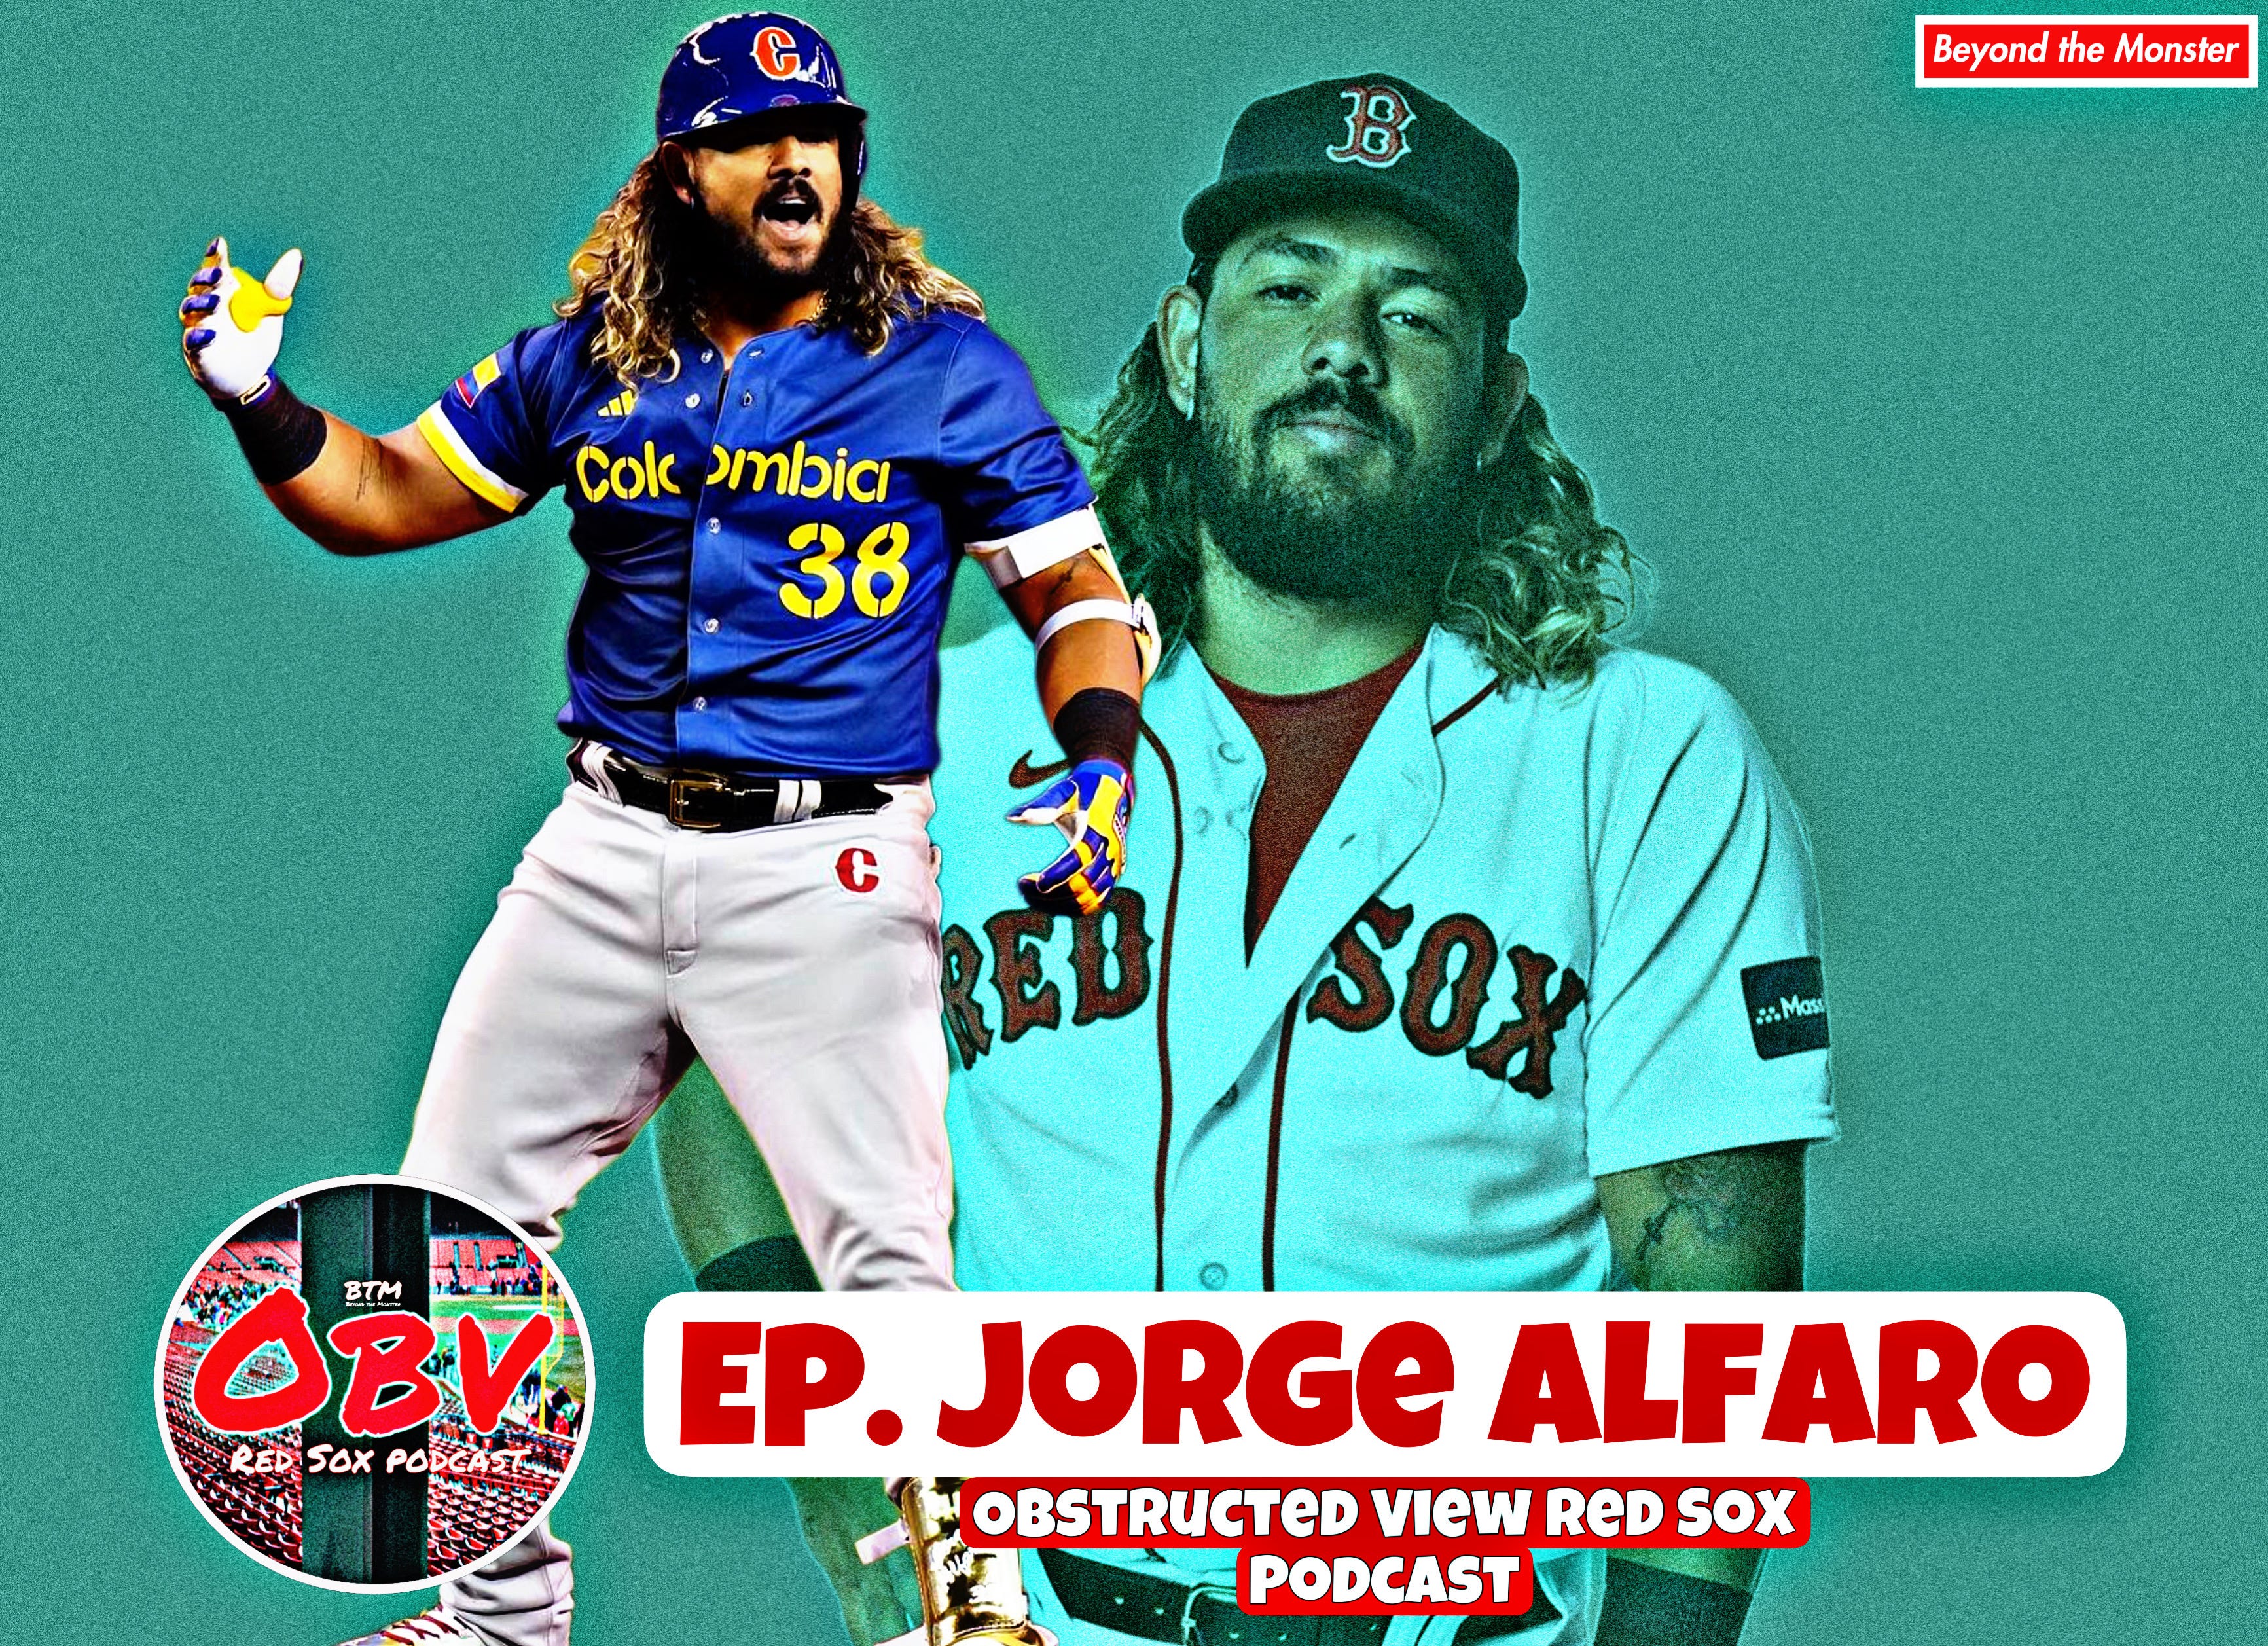 Obstructed View Red Sox Podcast: The Jorge Alfaro Interview